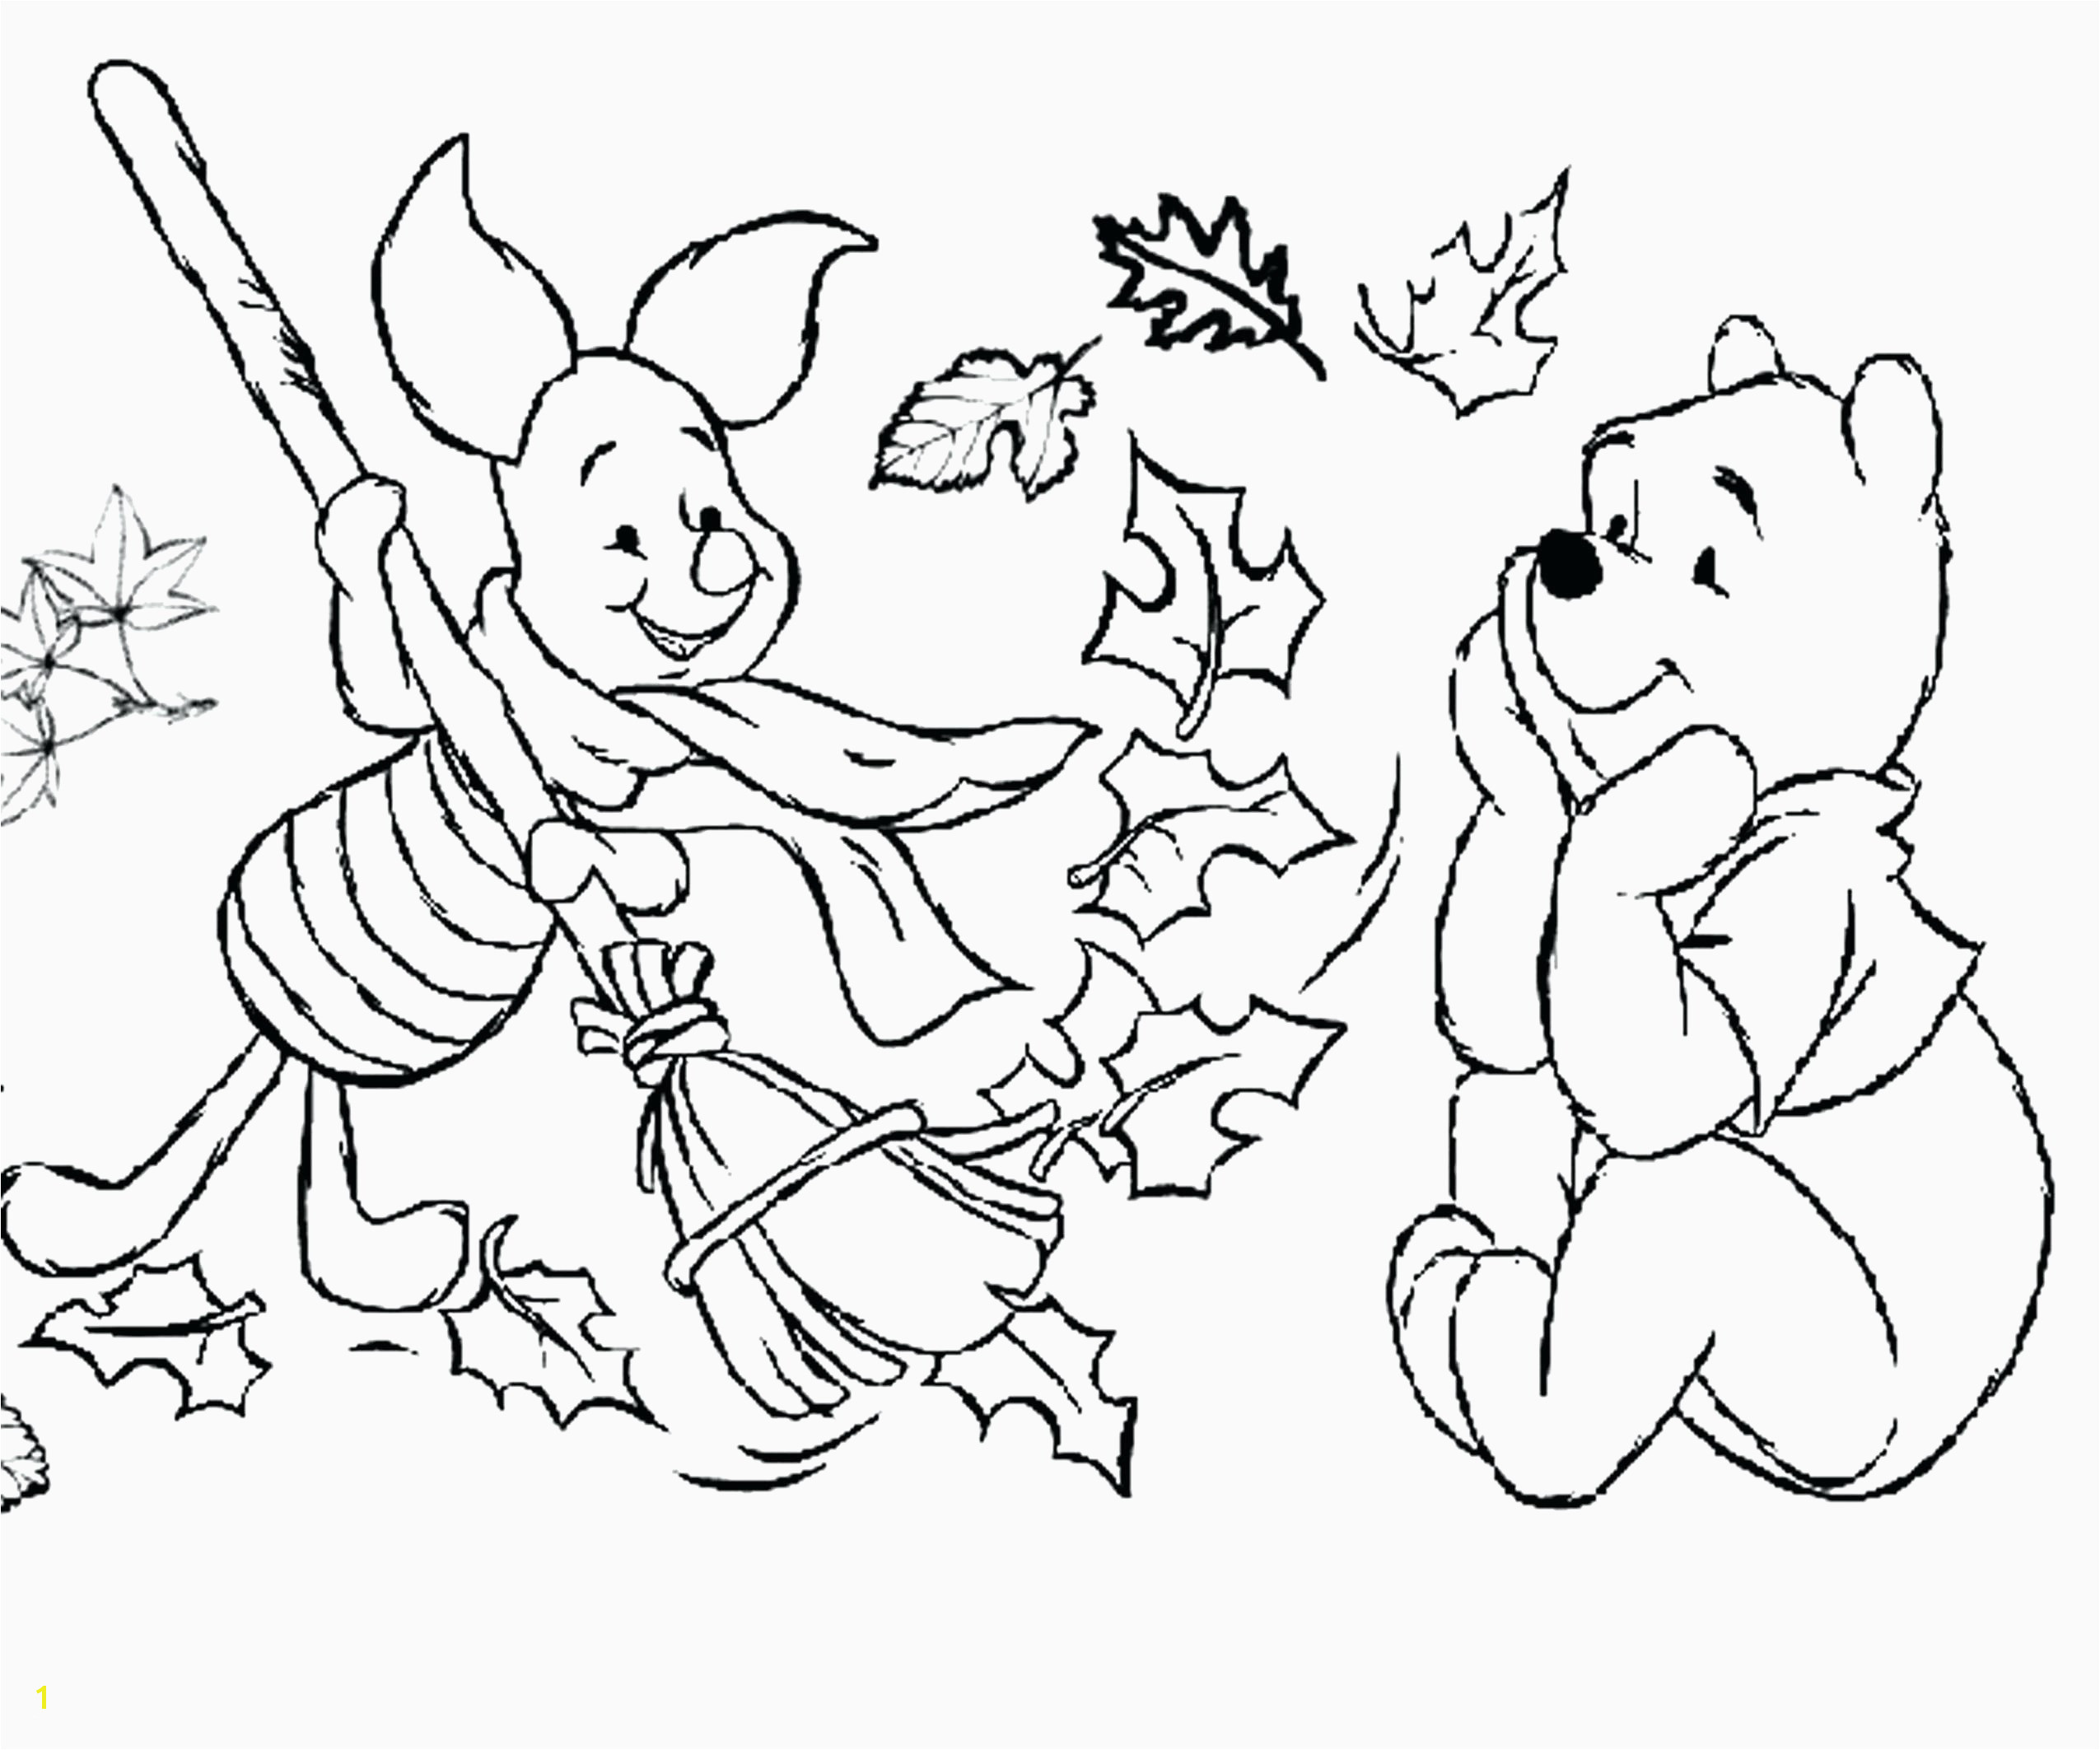 Cuties Coloring Pages Coloring Owls Luxury Cool Coloring Page Unique Witch Coloring Pages New Crayola